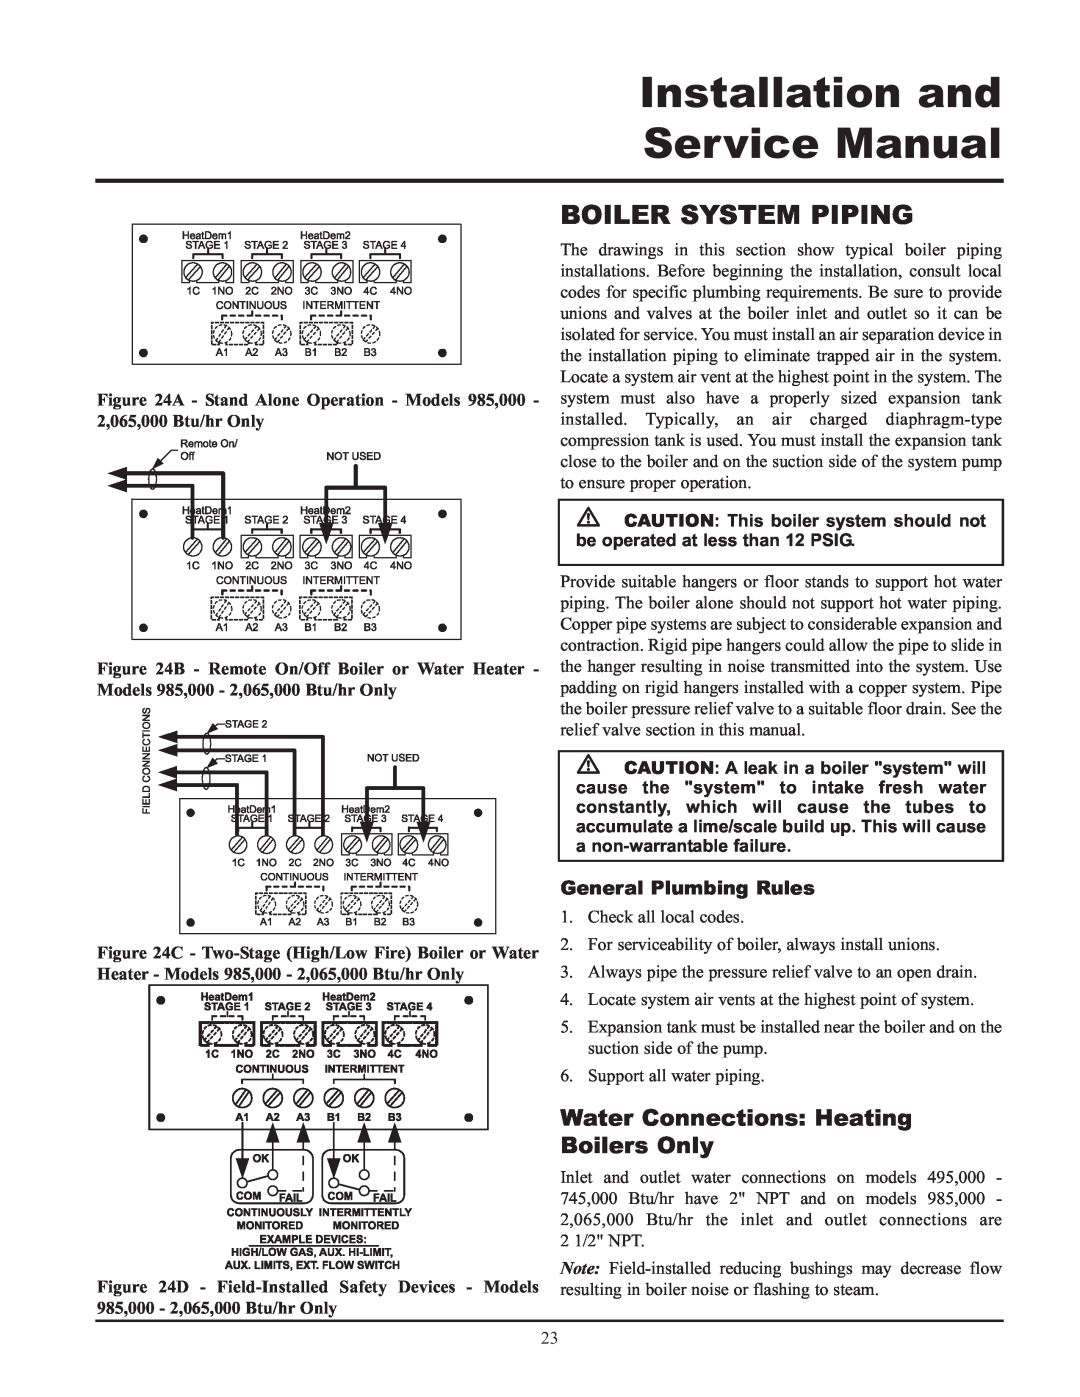 Lochinvar 000 - 2, 495, 065 Boiler System Piping, Water Connections Heating Boilers Only, General Plumbing Rules 